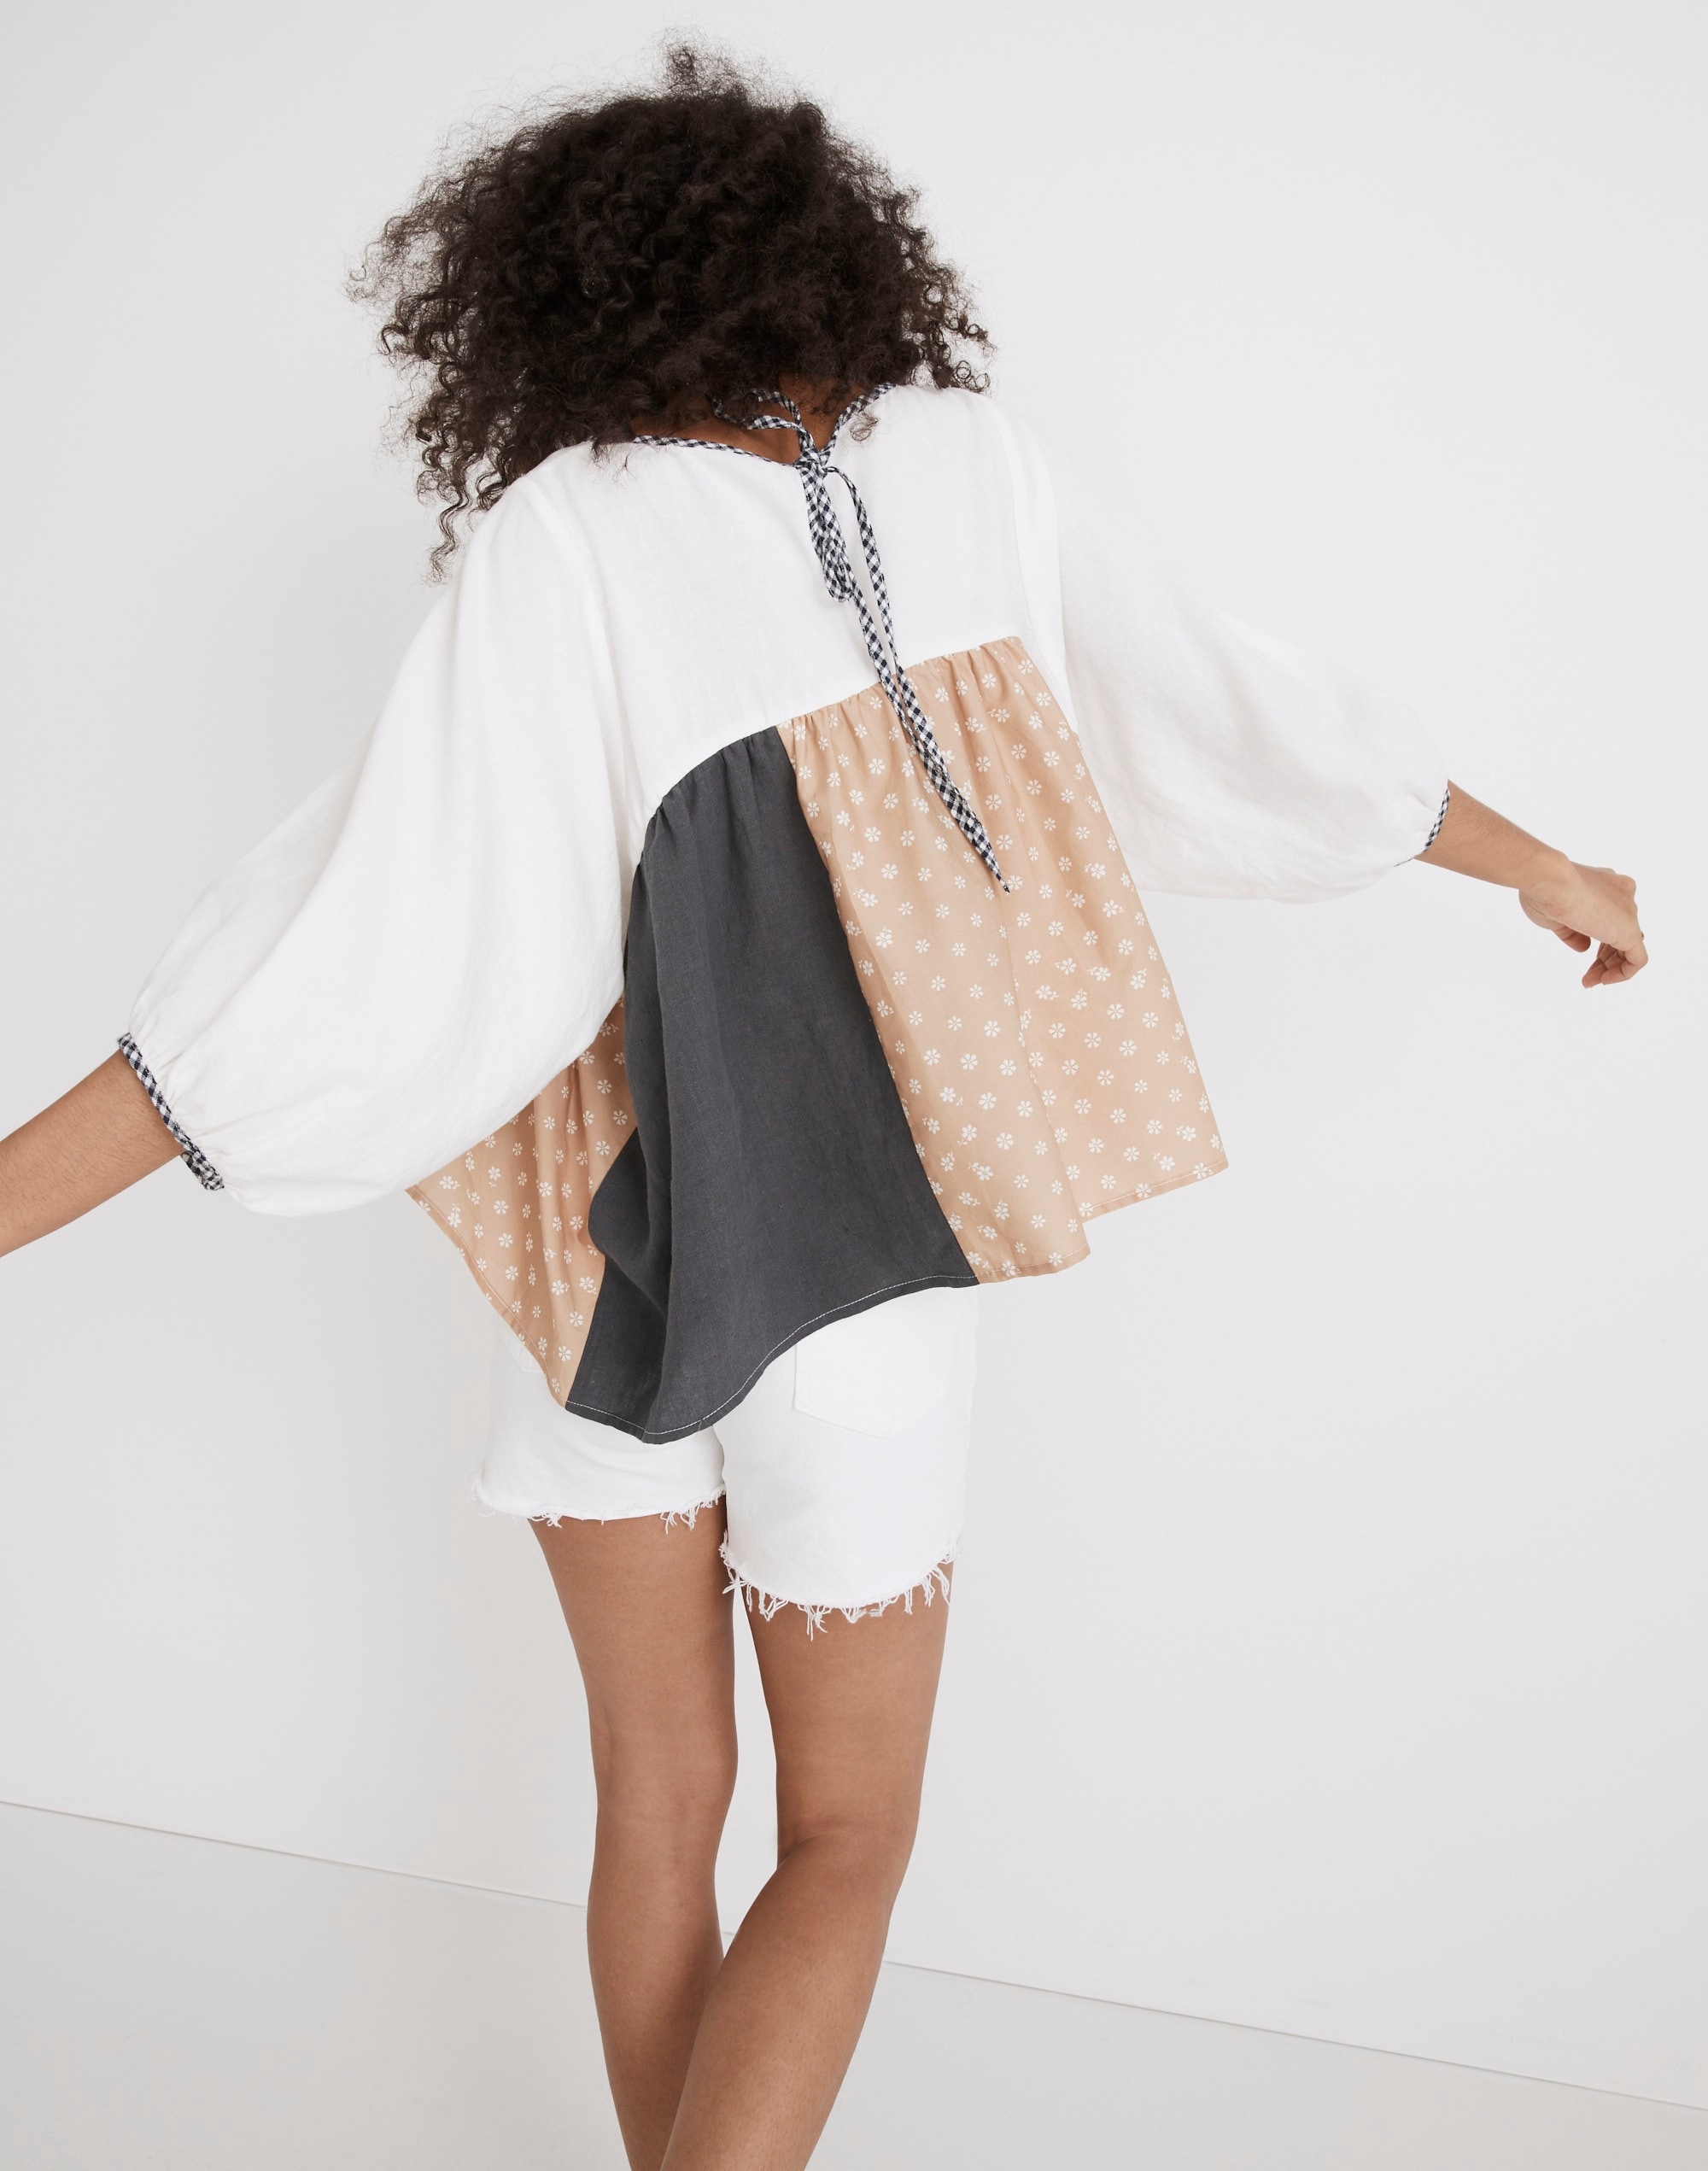 Madewell x La Réunion Upcycled Patchwork Peasant Shirt